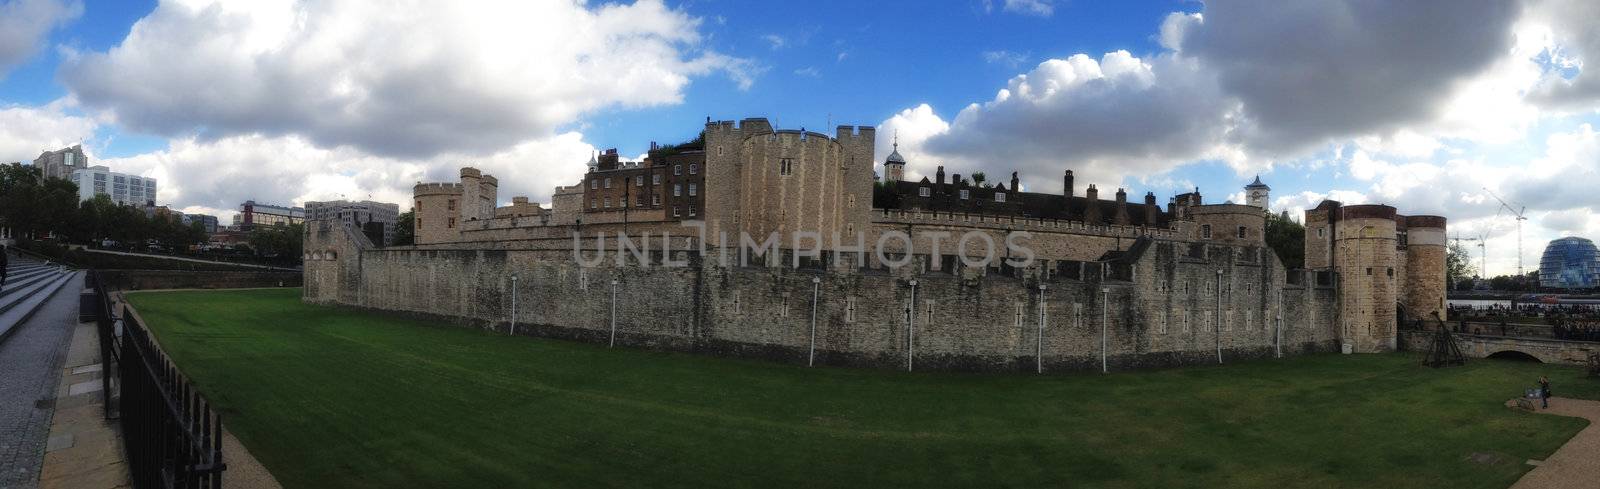 Tower of London Ancient Architecture by jovannig